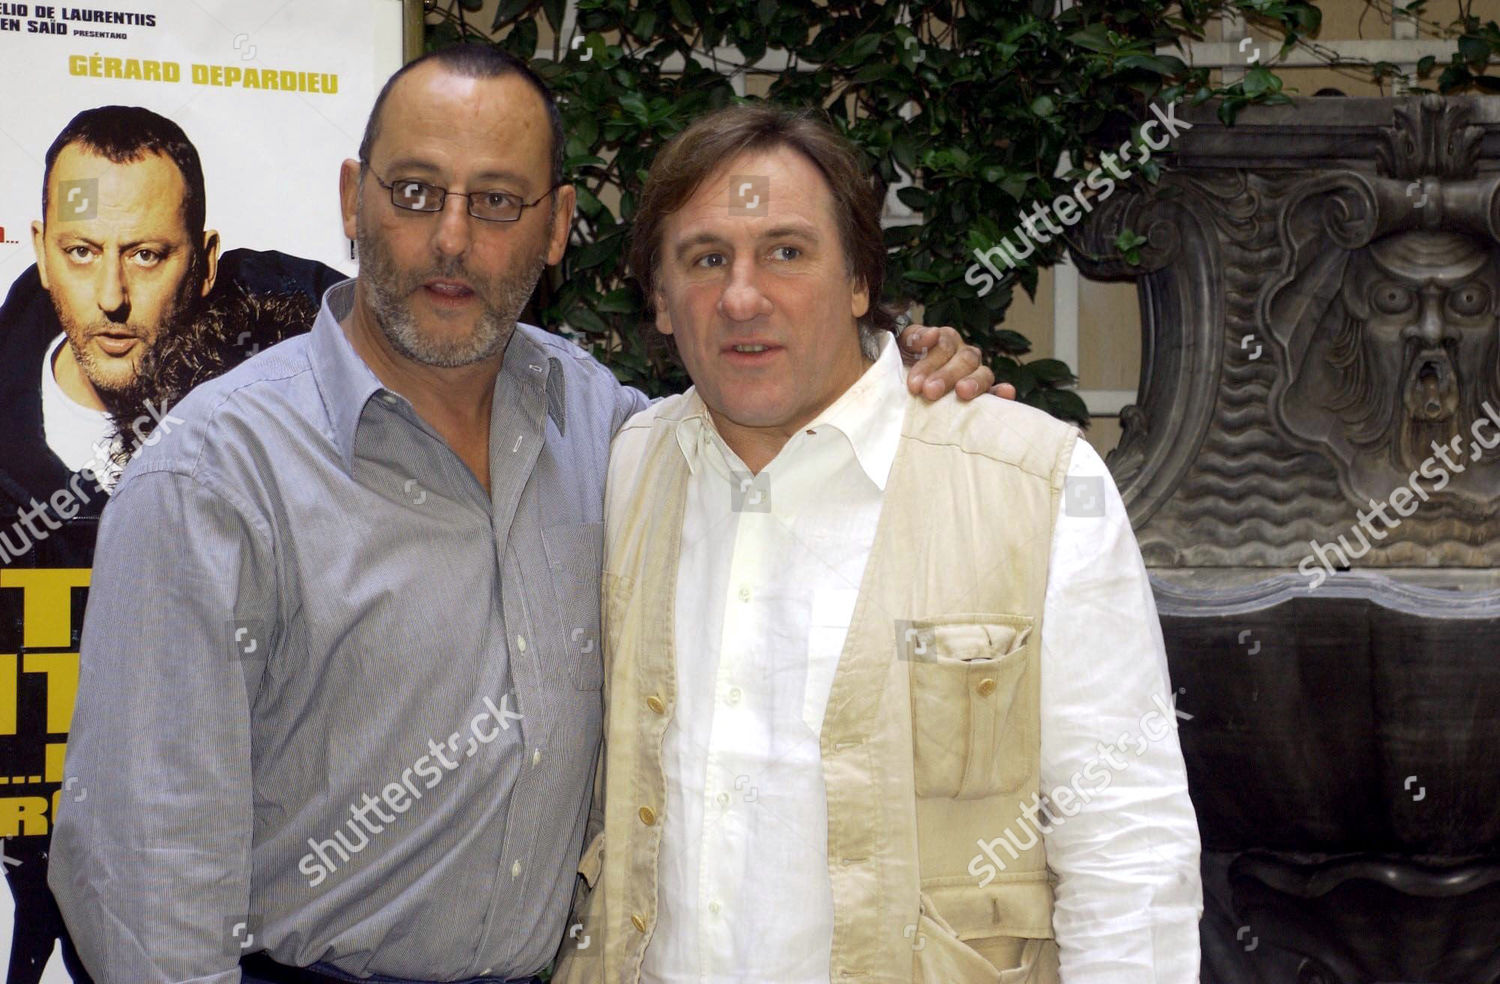 ¿Cuánto mide Gerard Depardieu? - Altura - Real height Sta-zitto-non-rompere-film-promotion-rome-italy-shutterstock-editorial-435941b